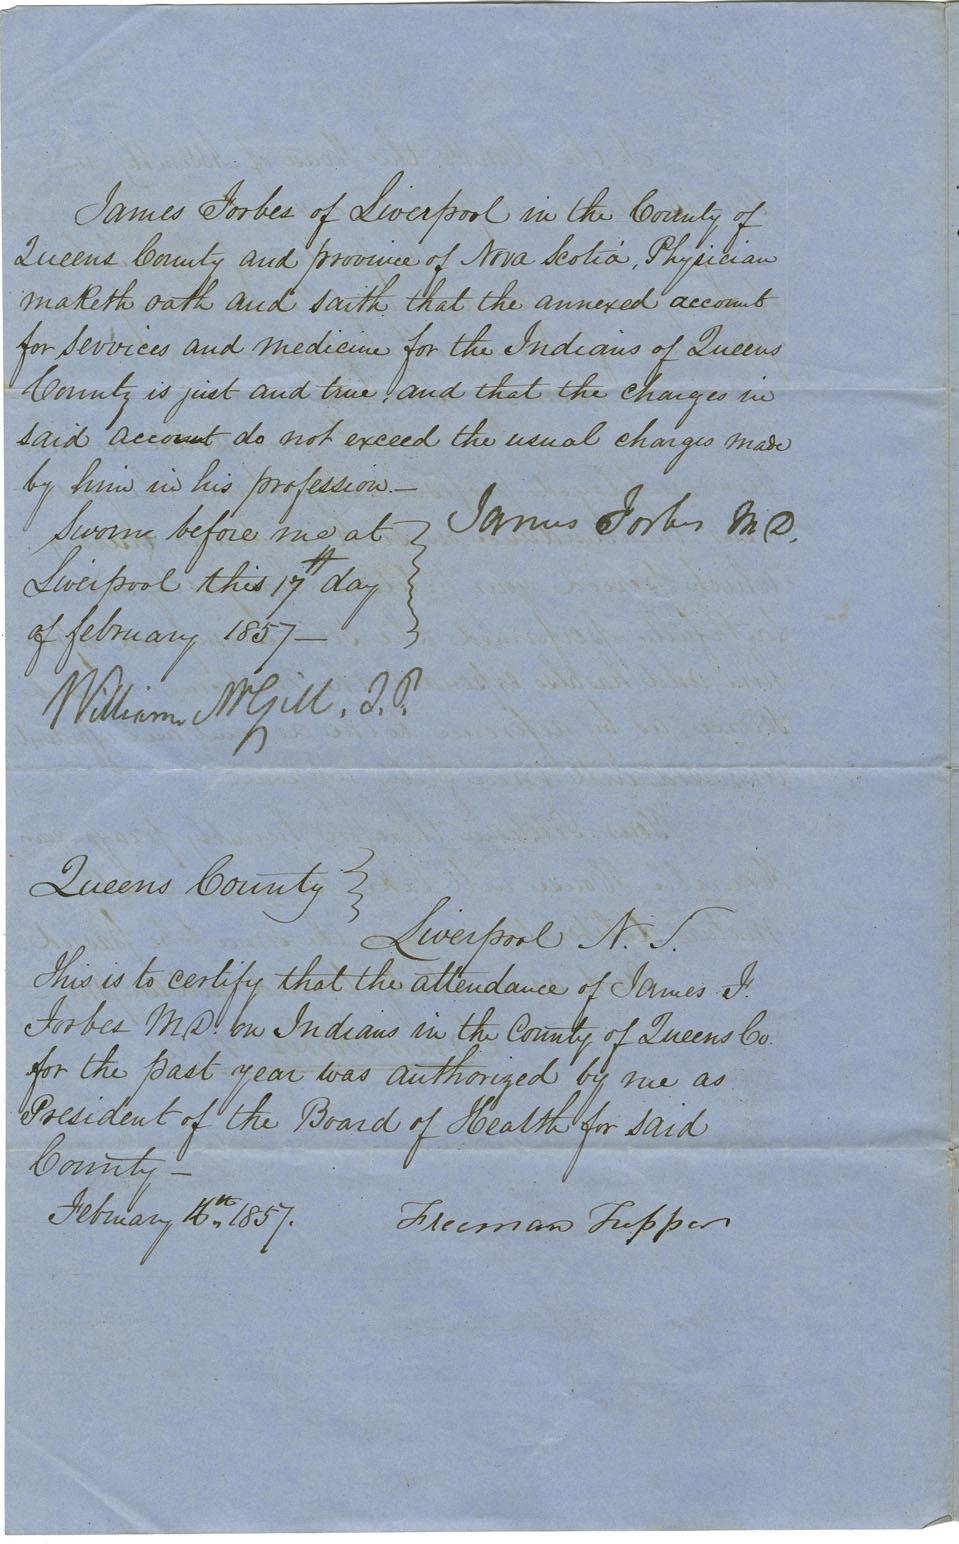 Petition of Dr. Forbes of Liverpool for money for care of Mi'kmaq in 1856 and 1857.